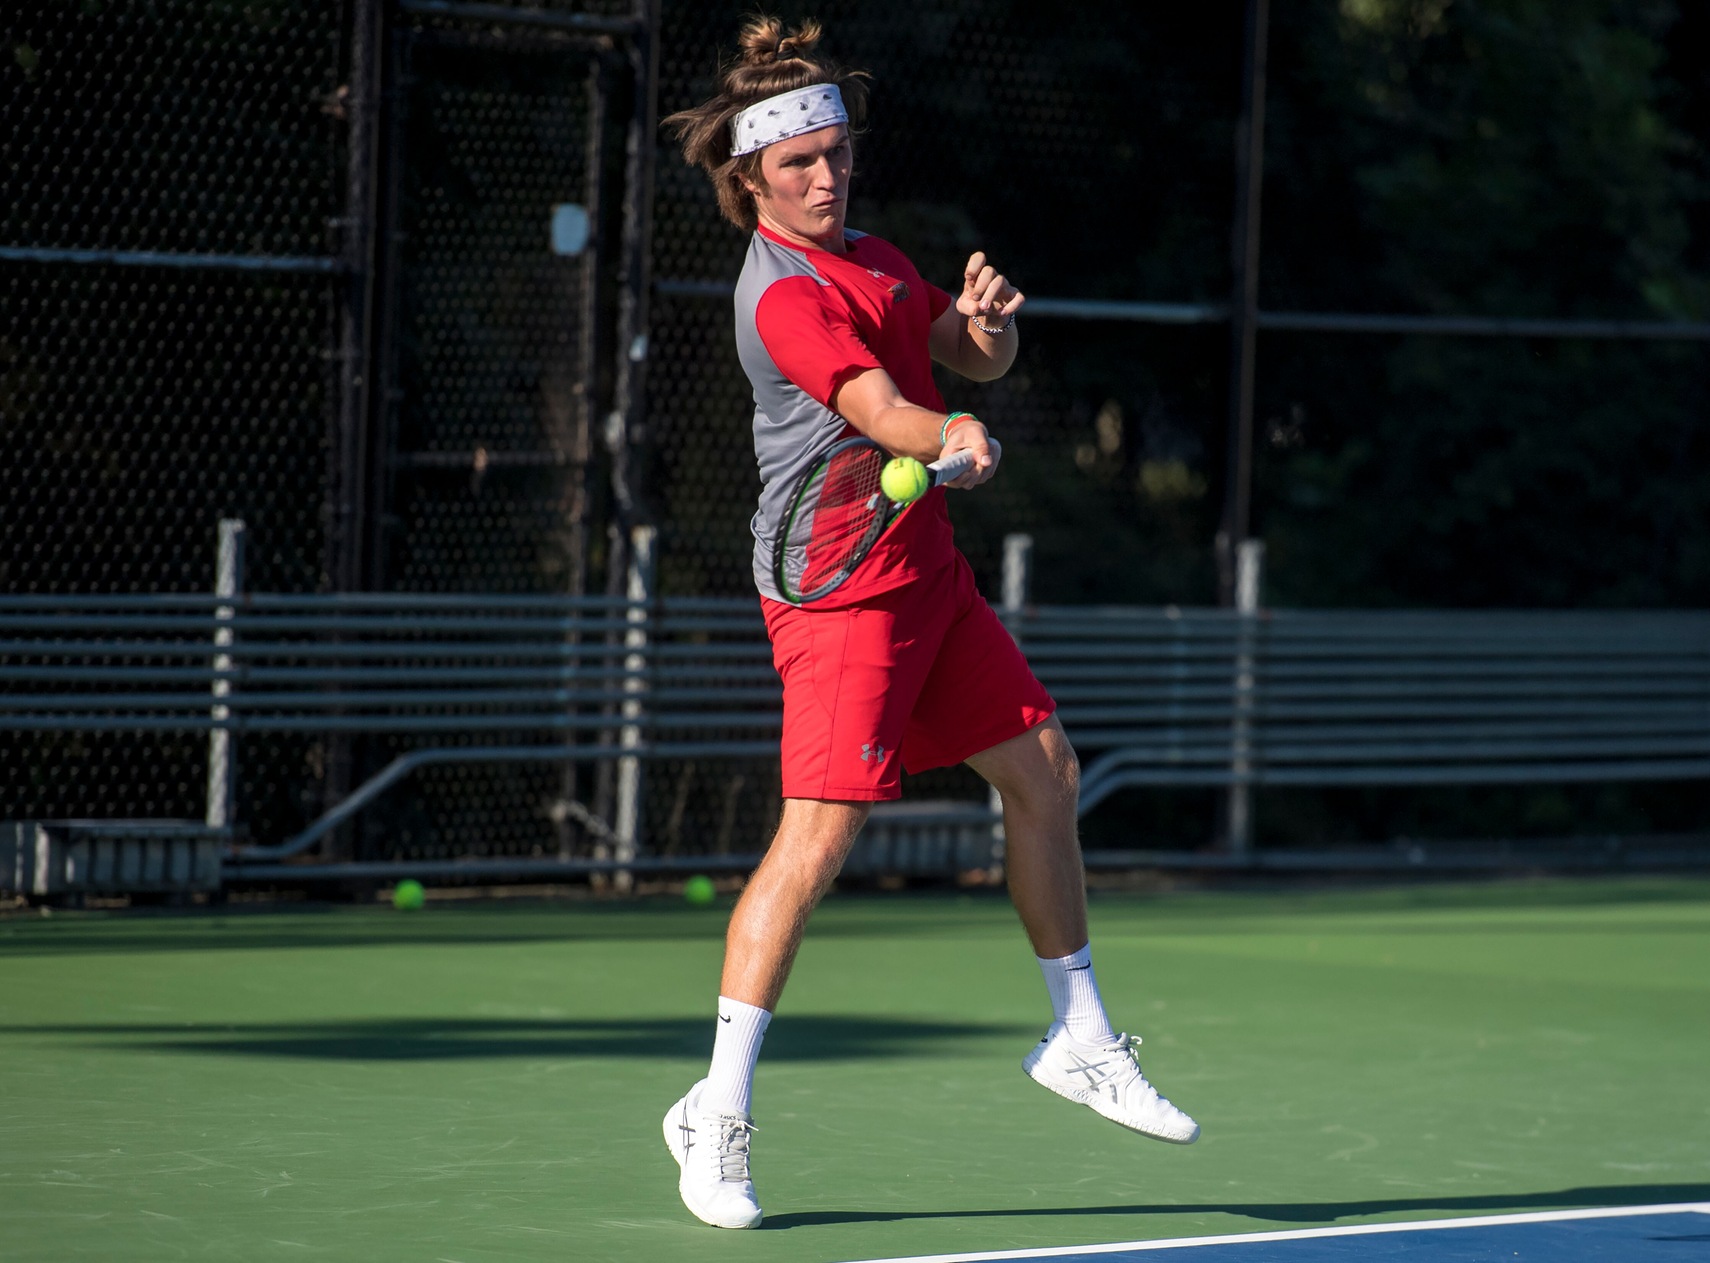 No. 1 Singles Player Kostiantyn Kalchev dominated 6-0, 6-0 in first match of the season